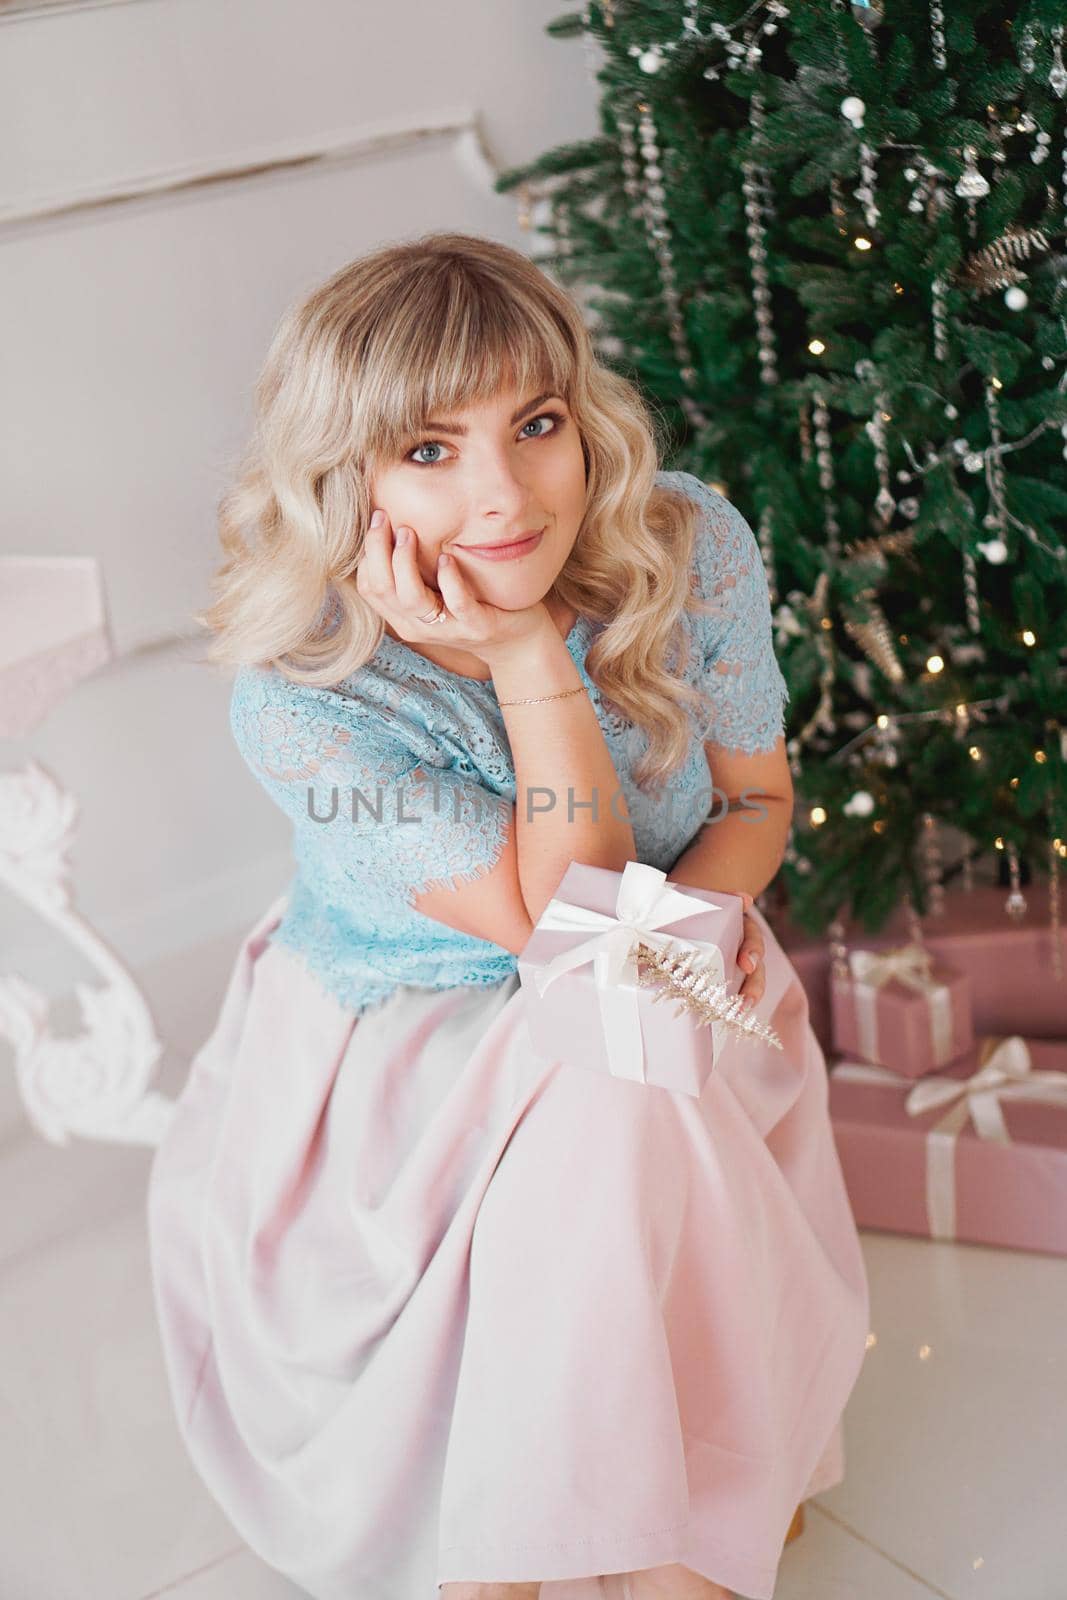 Lovely young woman with elegant style sitting indoor near decorated tree with pink Christmas presents